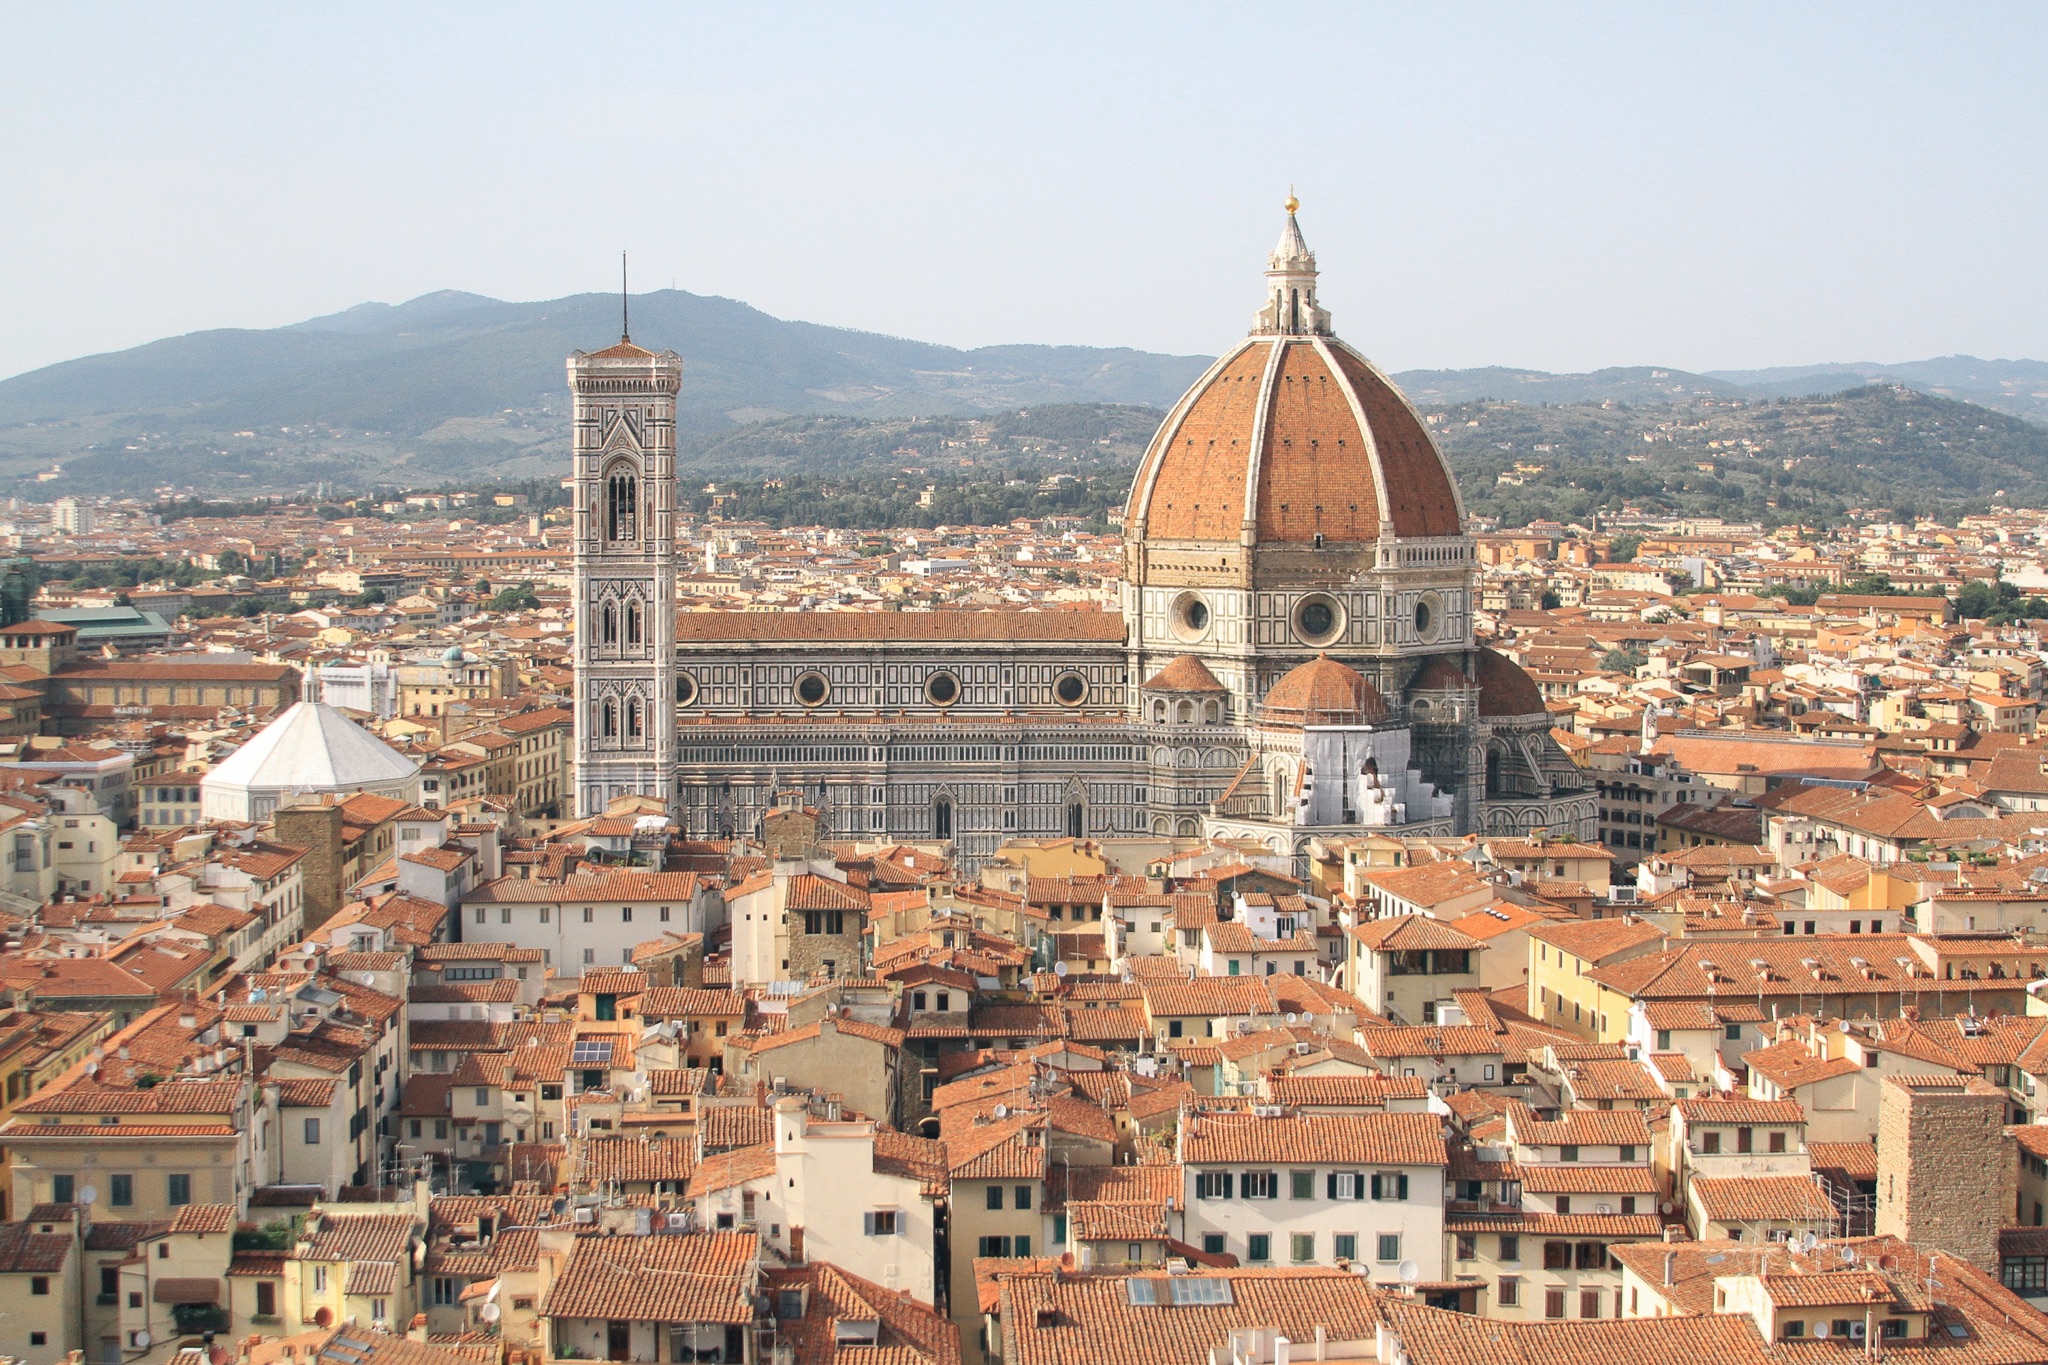 How to Plan Your Itinerary in Florence | Florence, Italy is one of the friendliest cities in the world. Here are the best things to do and places to go, from restaurants and views to Tuscany day trips. Use any ideas you like, then mix and match them…